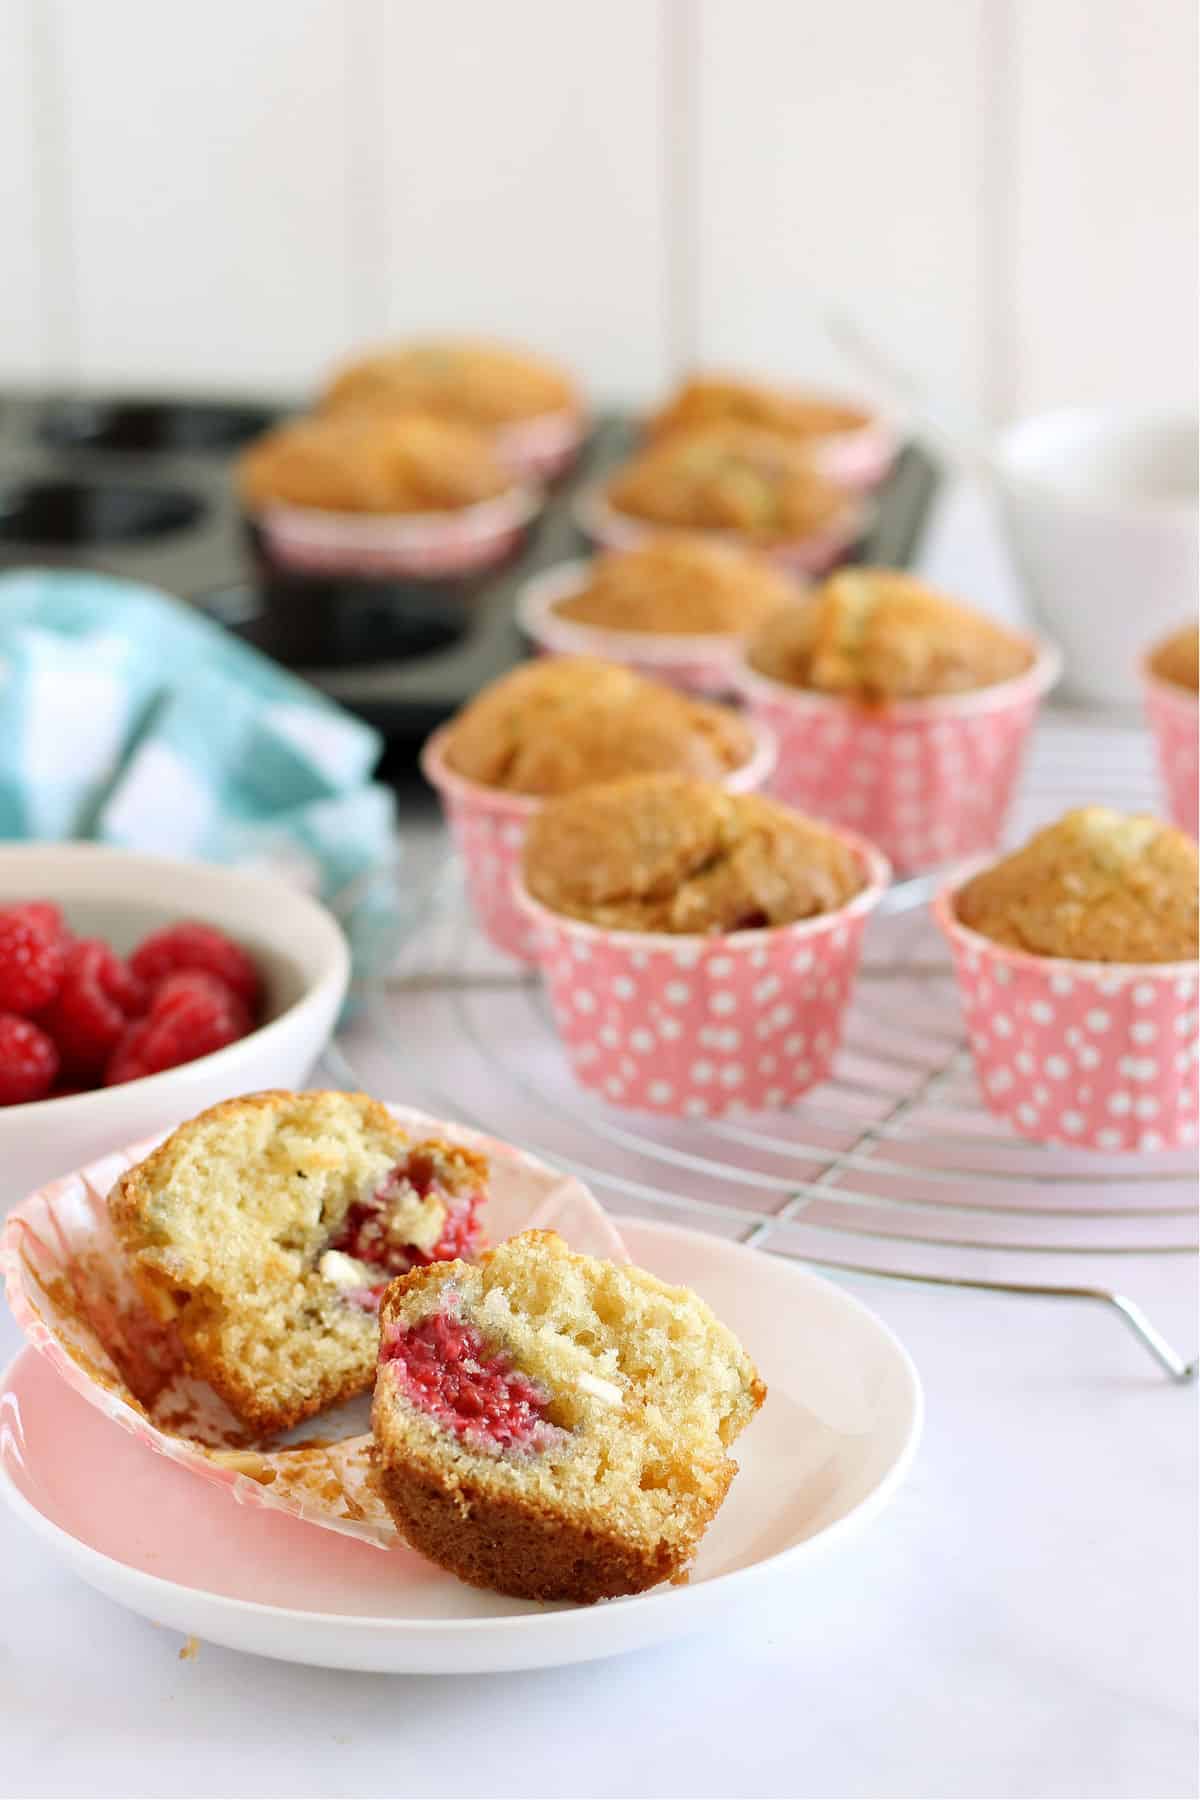 A close up of a raspberry and white chocolate muffin.